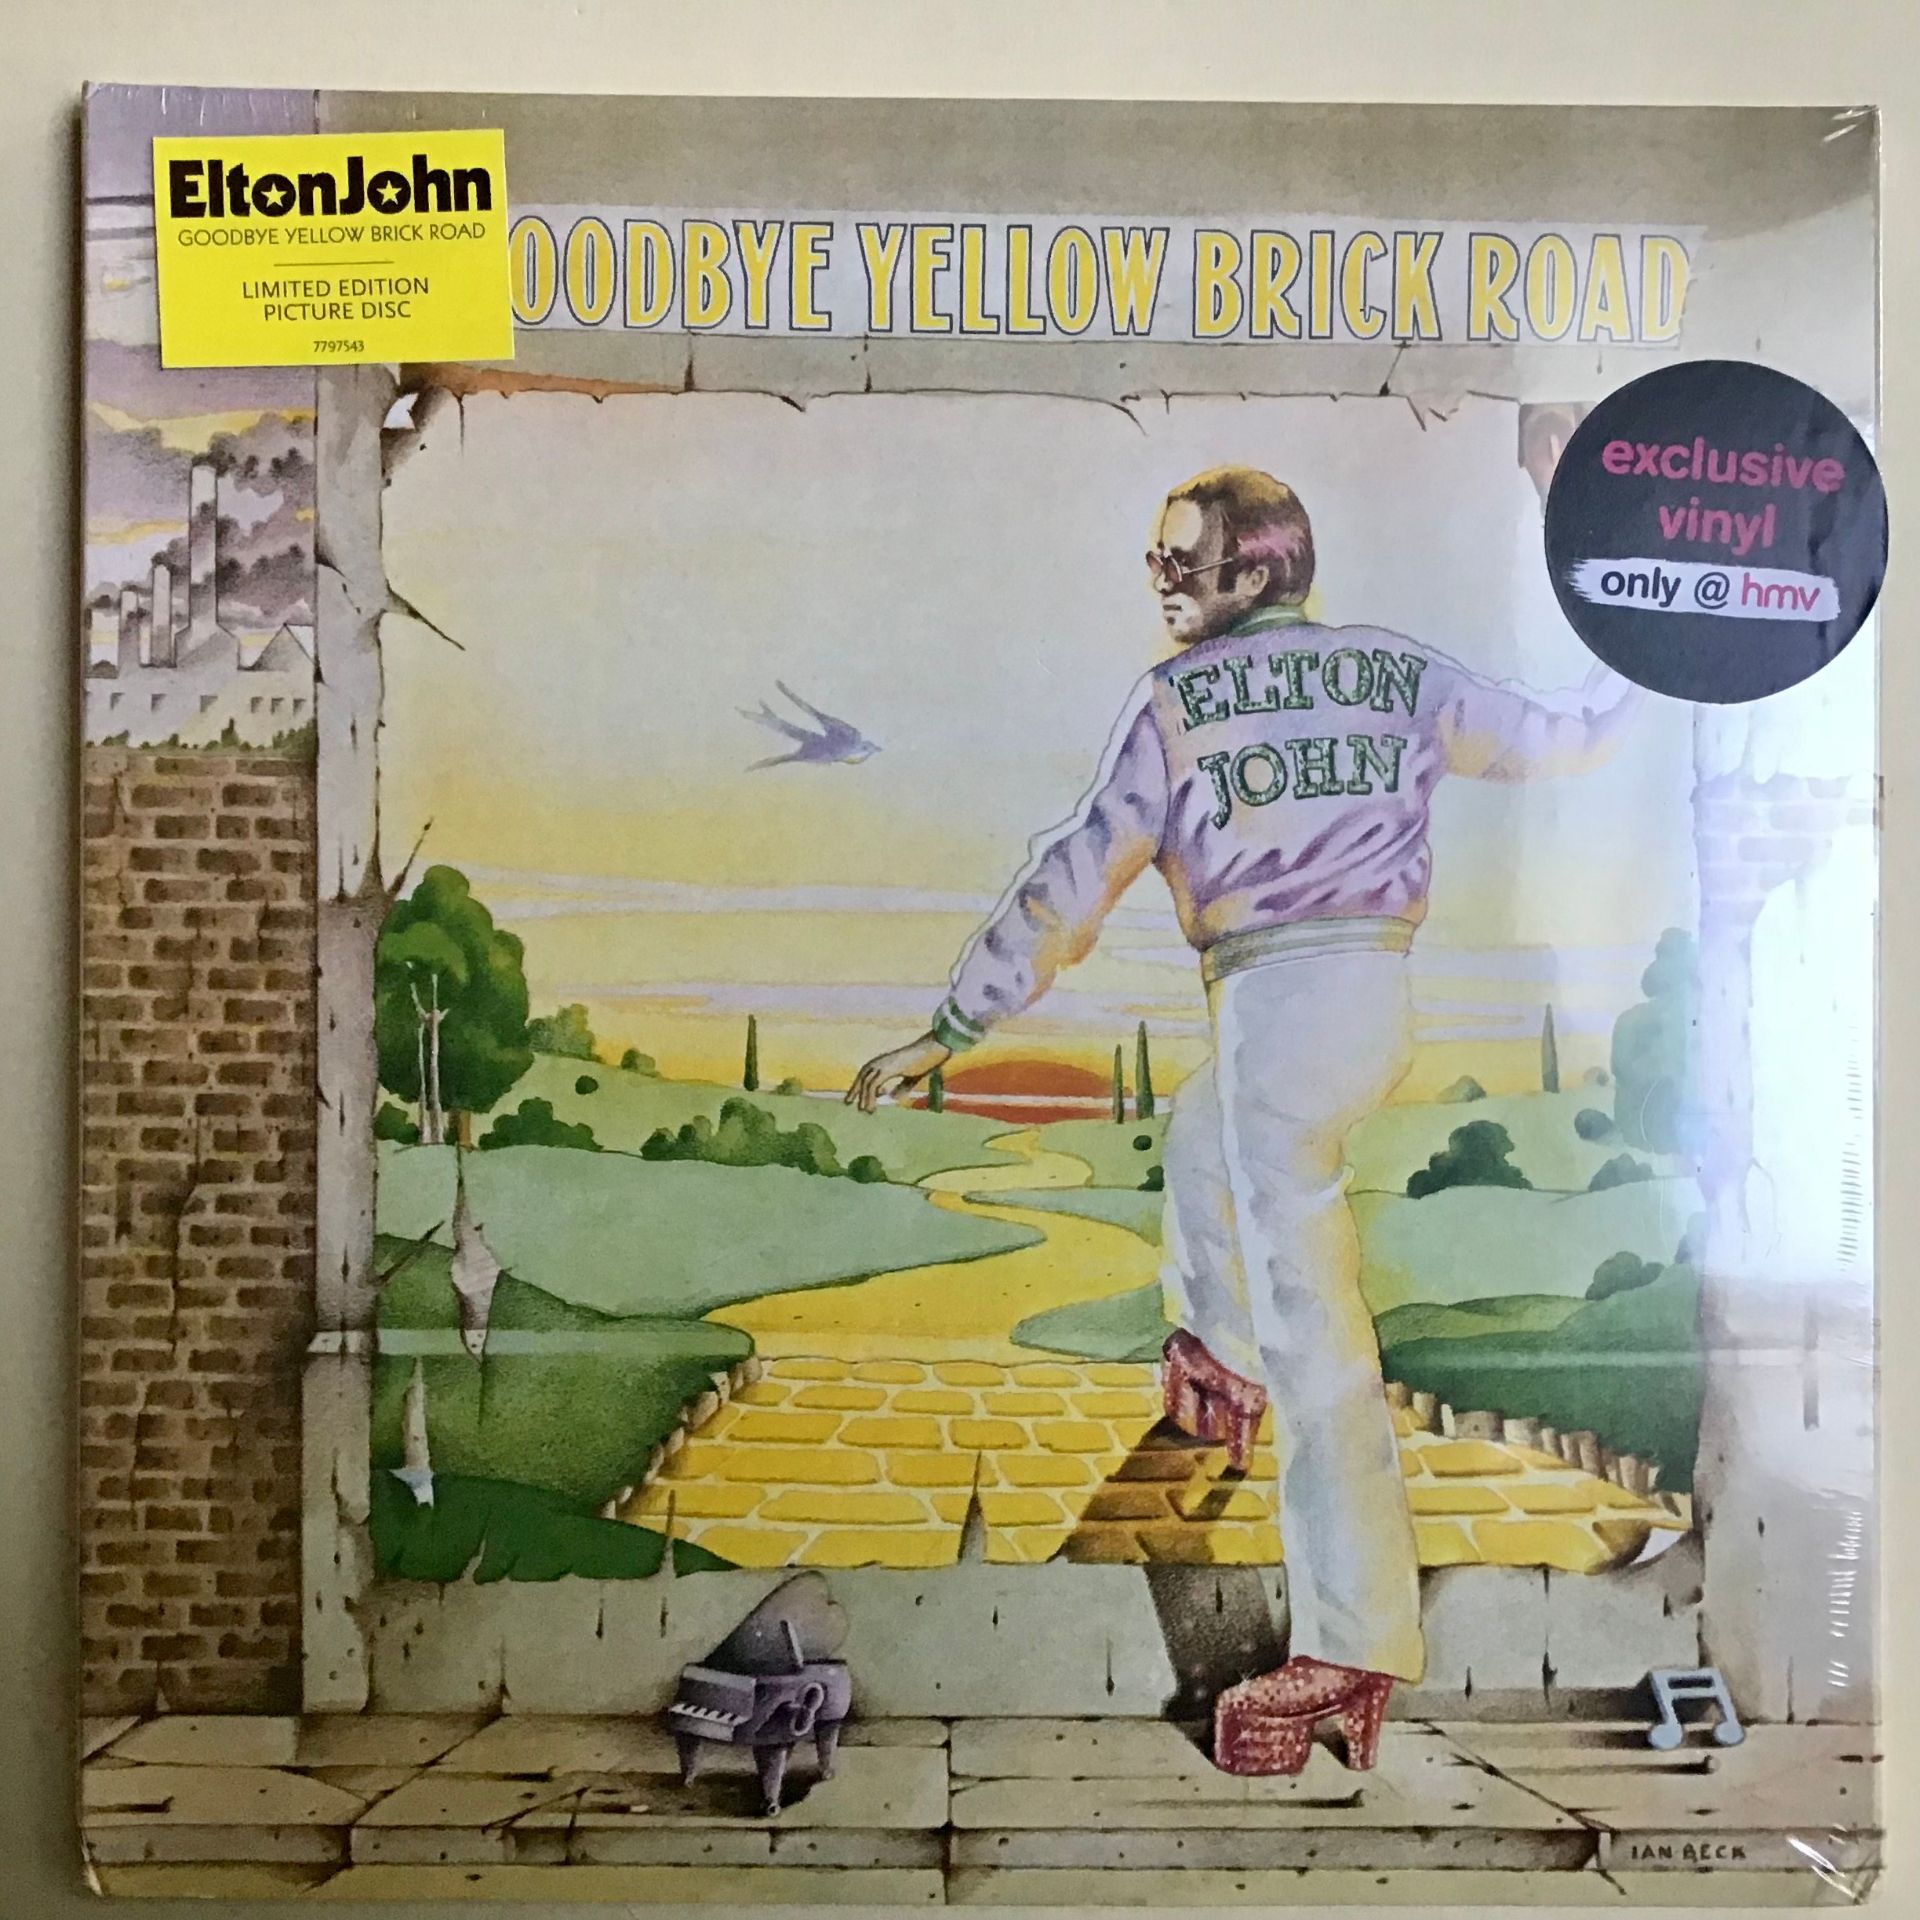 ELTON JOHN 'GOODBYE YELLOW BRICK ROAD' LIMITED 2 LP PICTURE DISC RECORD. Limited edition double lp